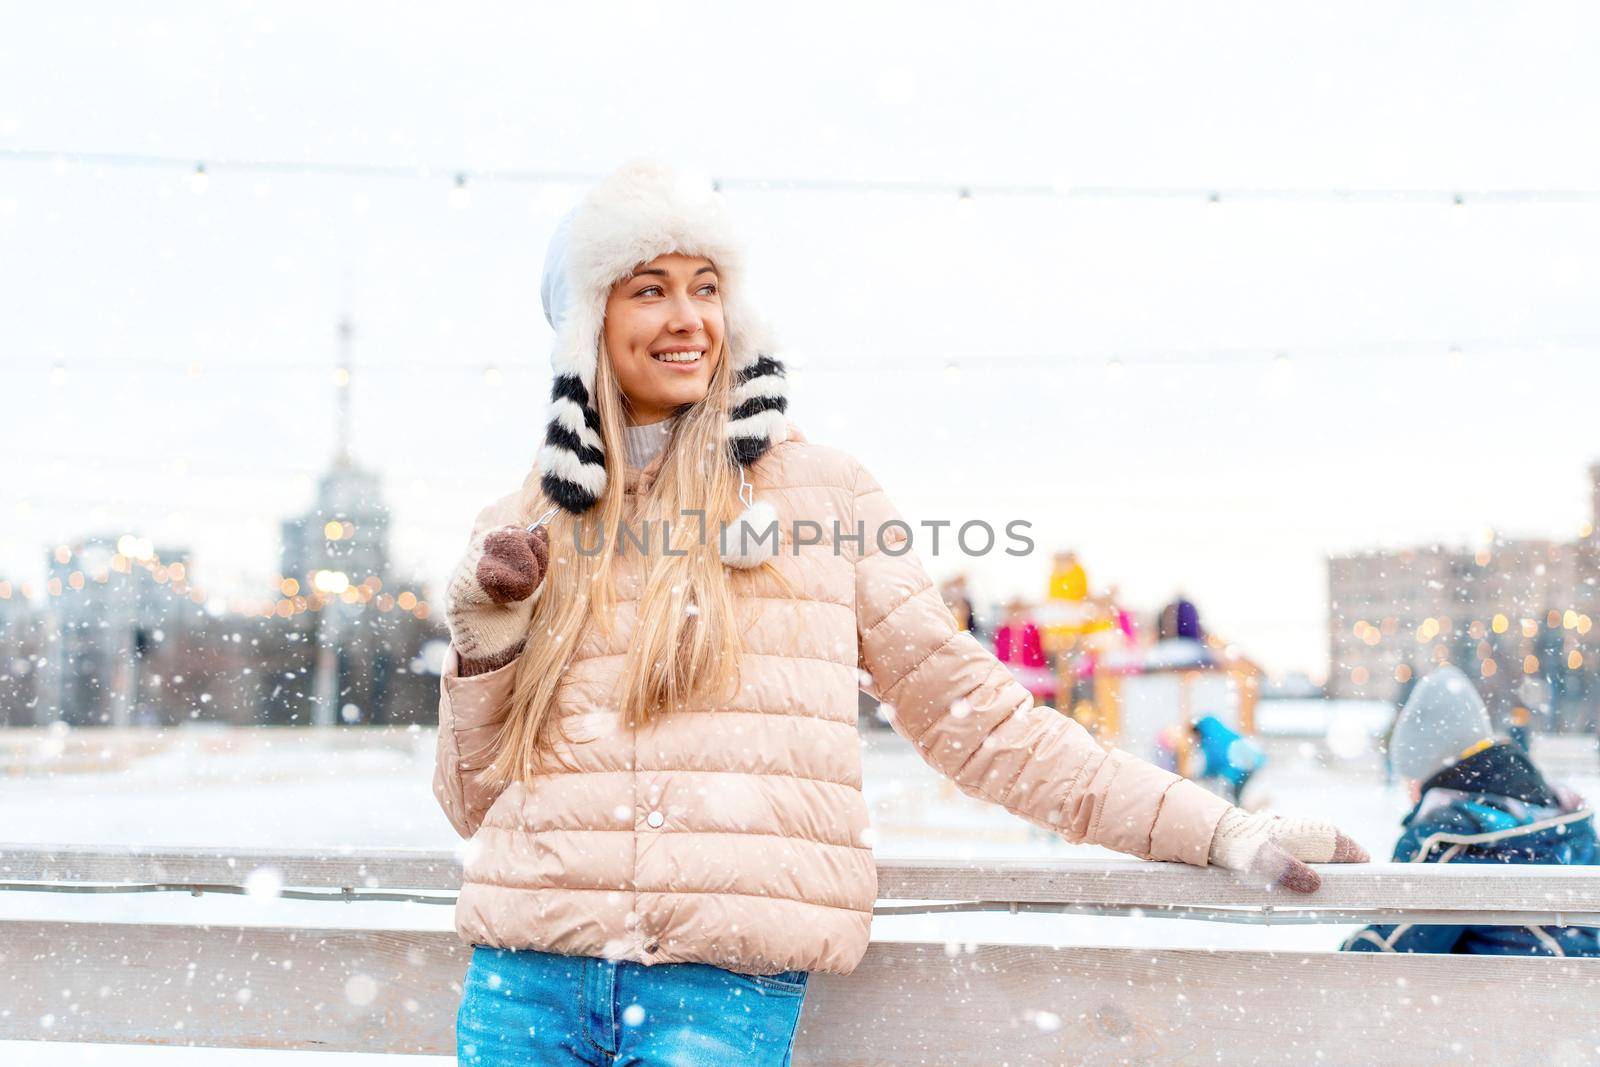 Medium shoot portrait of romantic european lady wears stylish winter jacket and funny fluffy hat in snowy day. Outdoor photo of inspired blonde woman enjoying free time in winter city. Christmas